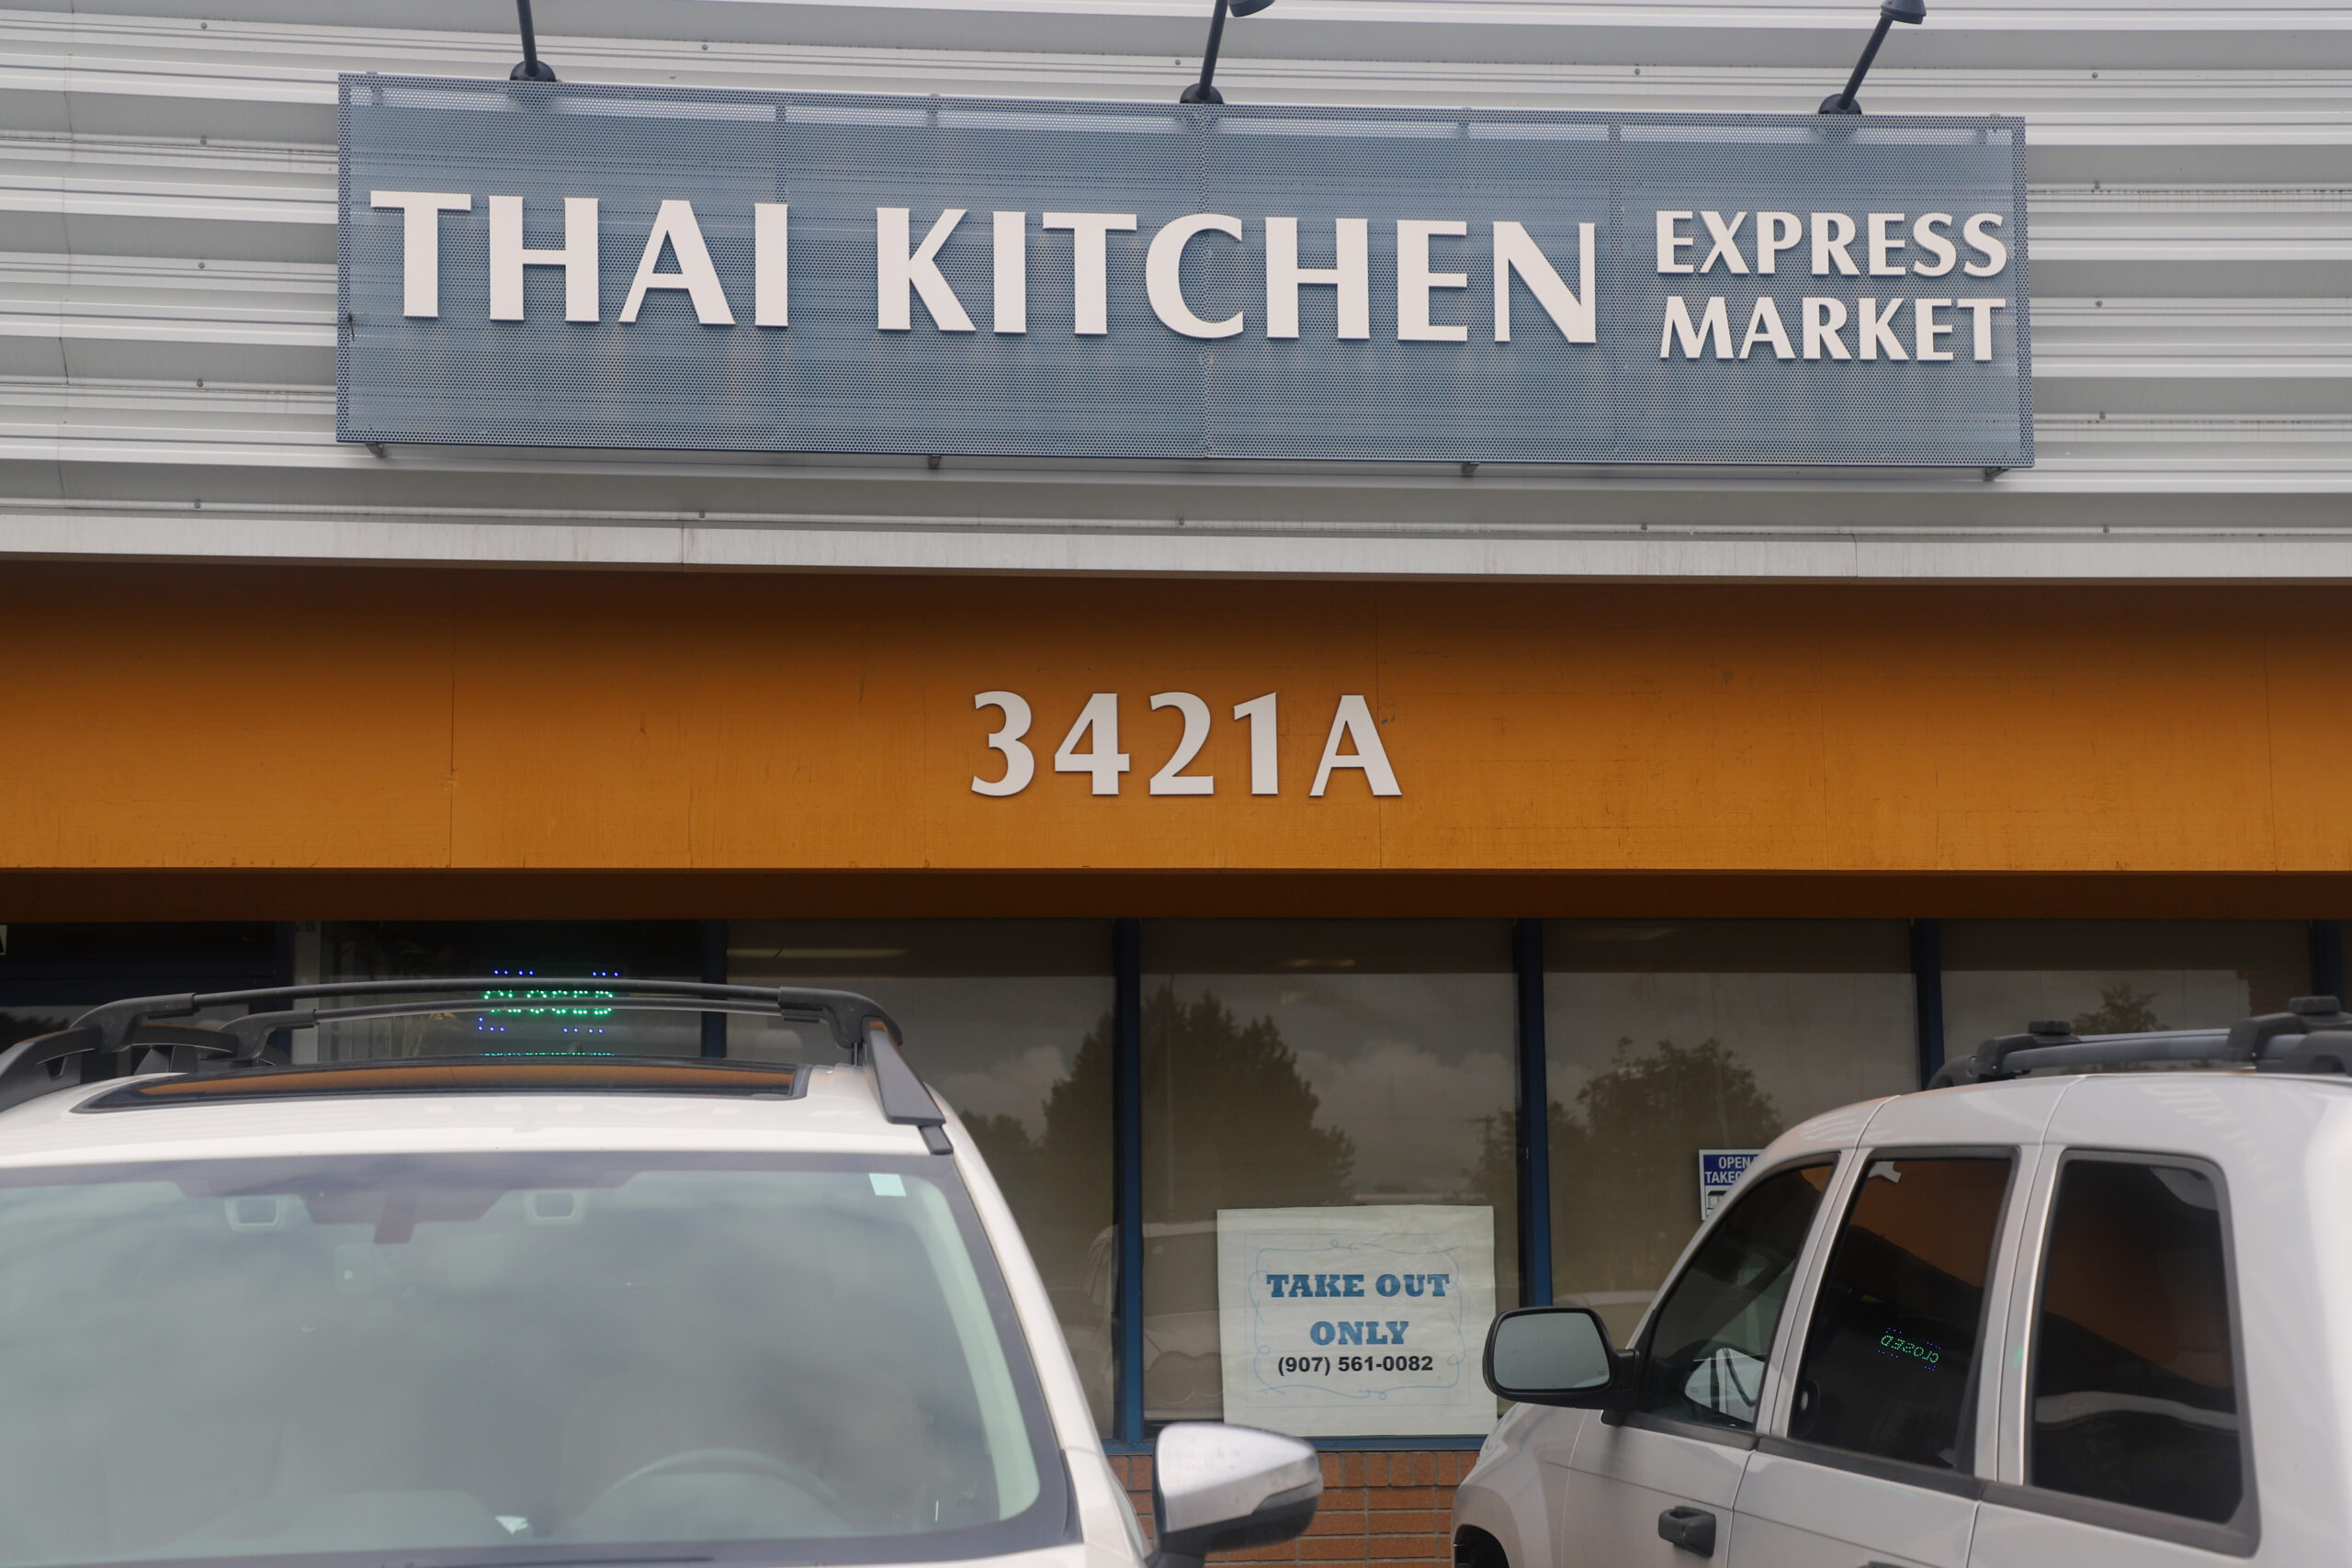 The exterior of a strip mall. A sign says "THAI KITCHEN EXPRESS MARKET."